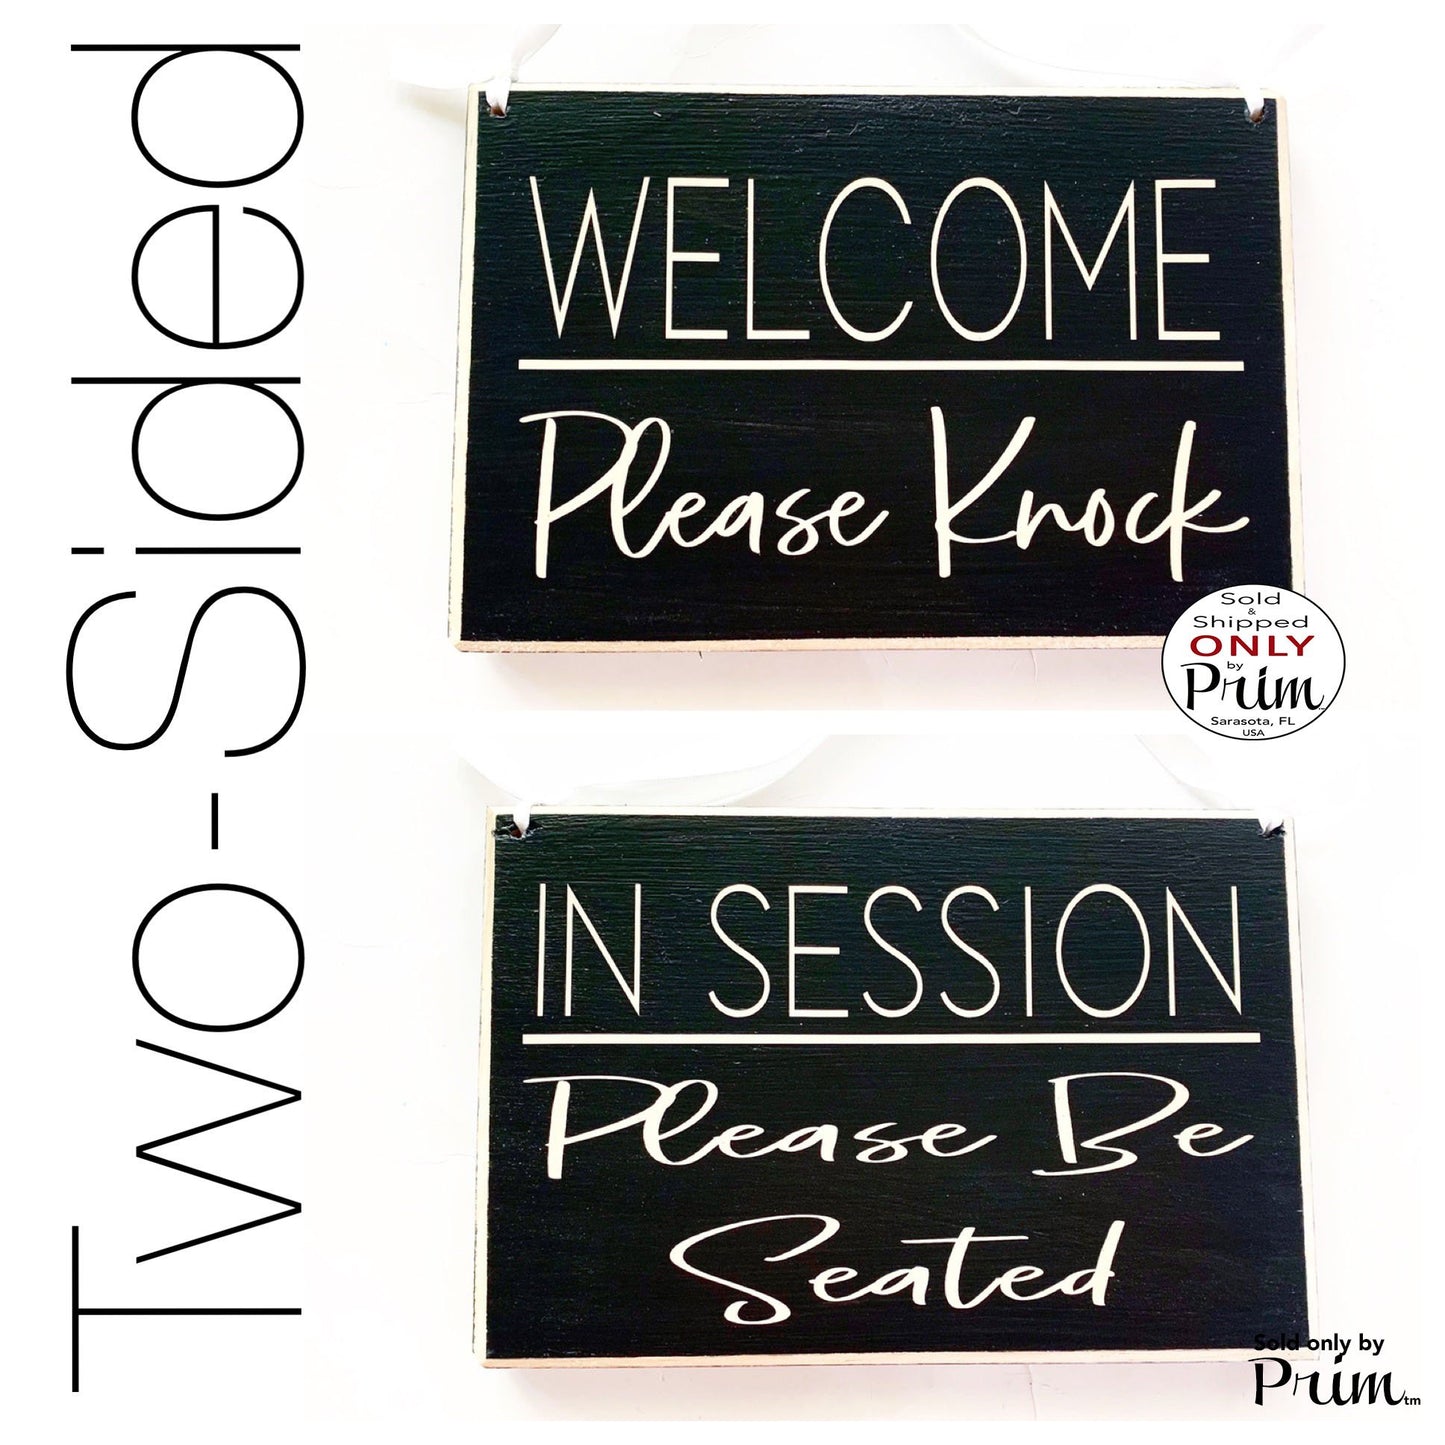 8x6 Welcome Please Knock In Session Please Be Seated Custom Wood Sign Please Do Not Disturb Welcome In Meeting Conference Custom Door Plaque